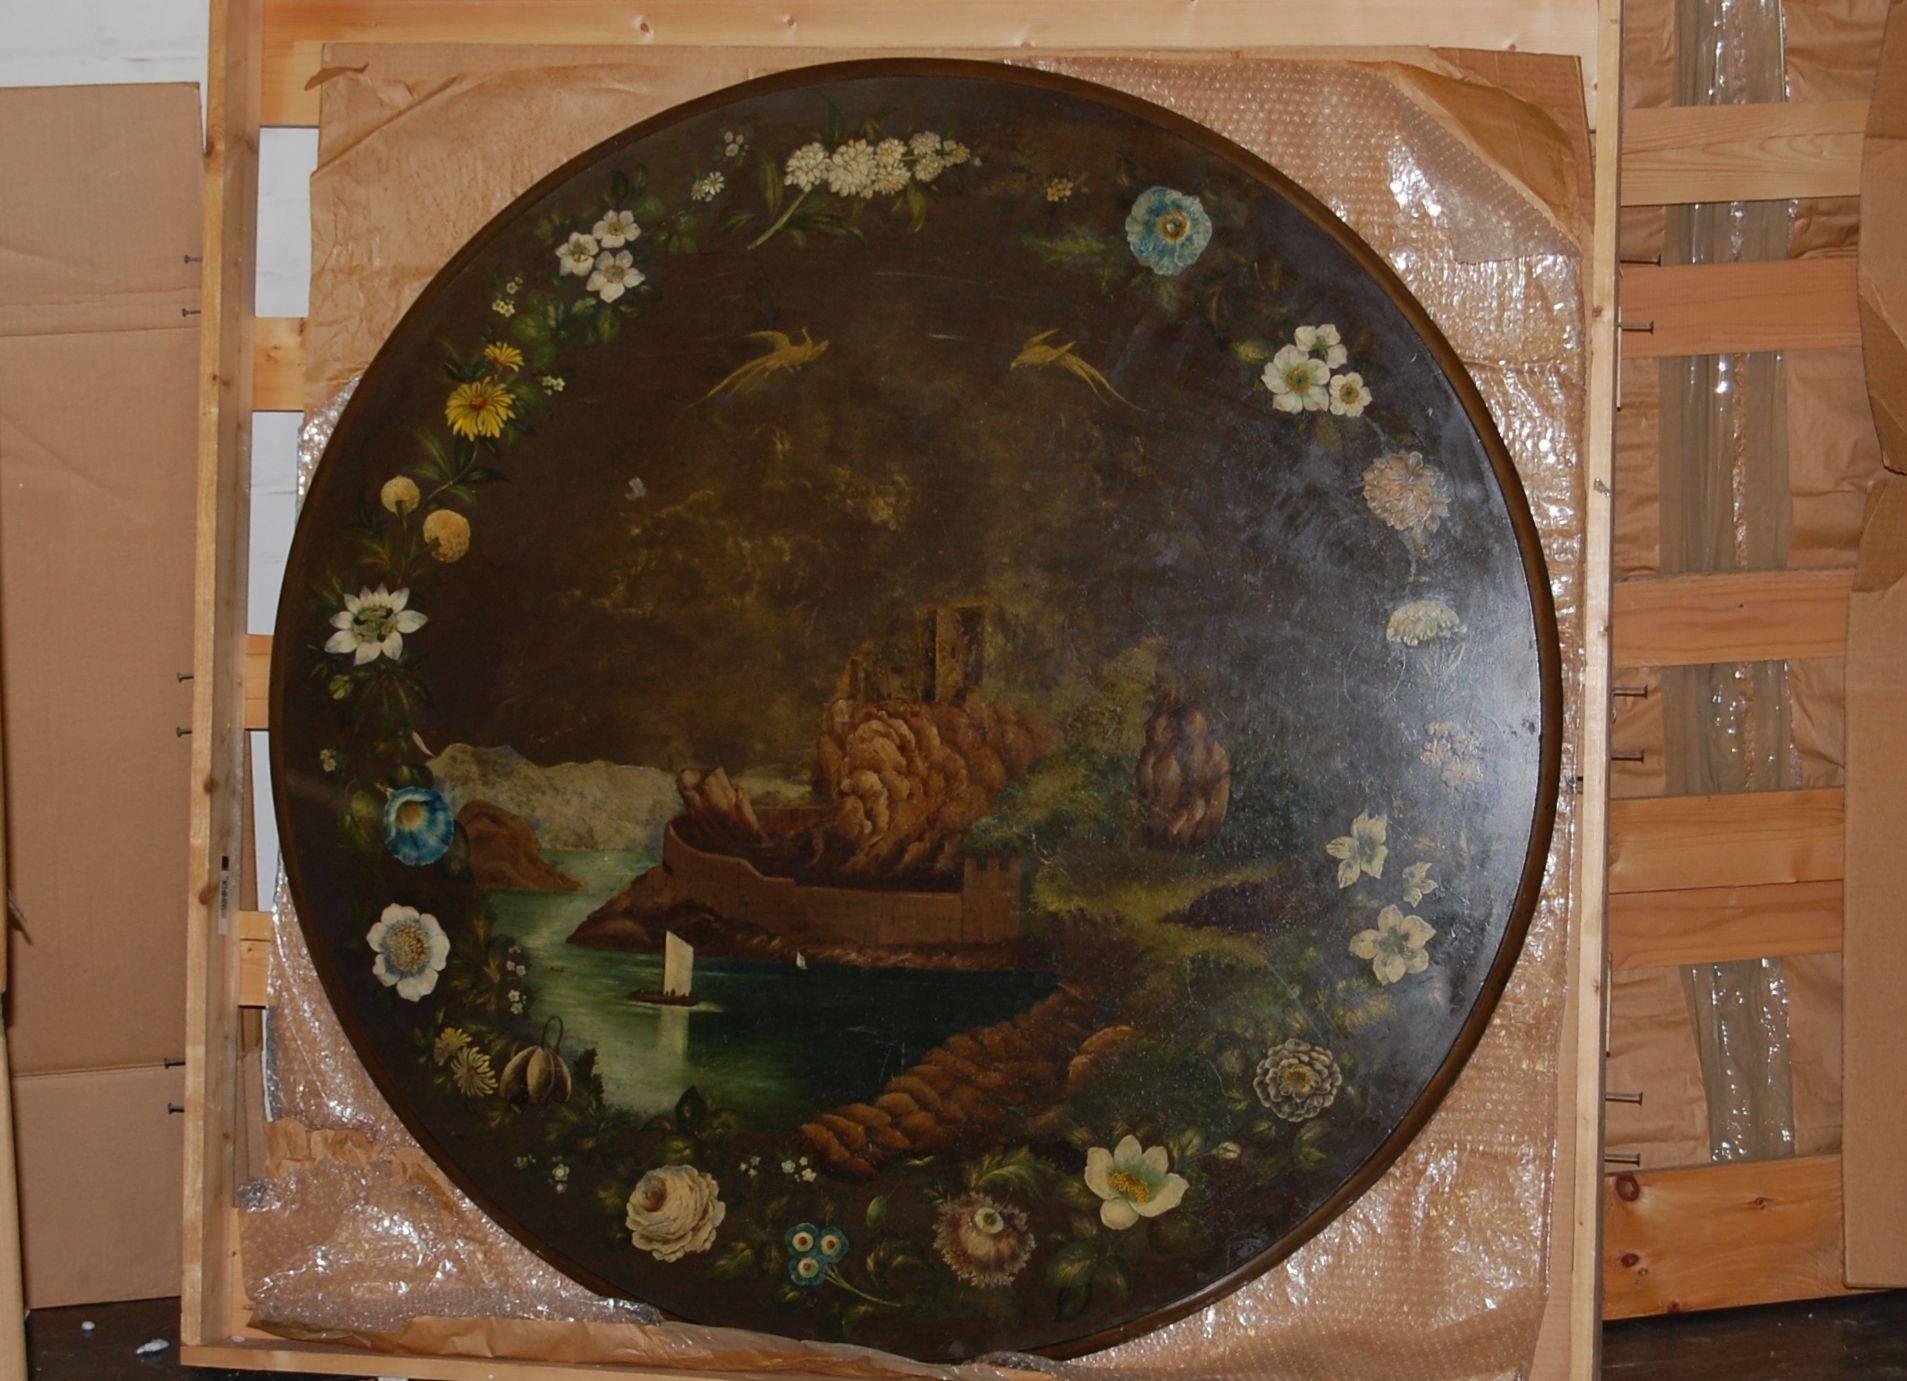 Mahogany triangular base with three columns supporting a slate painted top, the border around the top features flowers, the center section features a lake, castle, birds, etc.